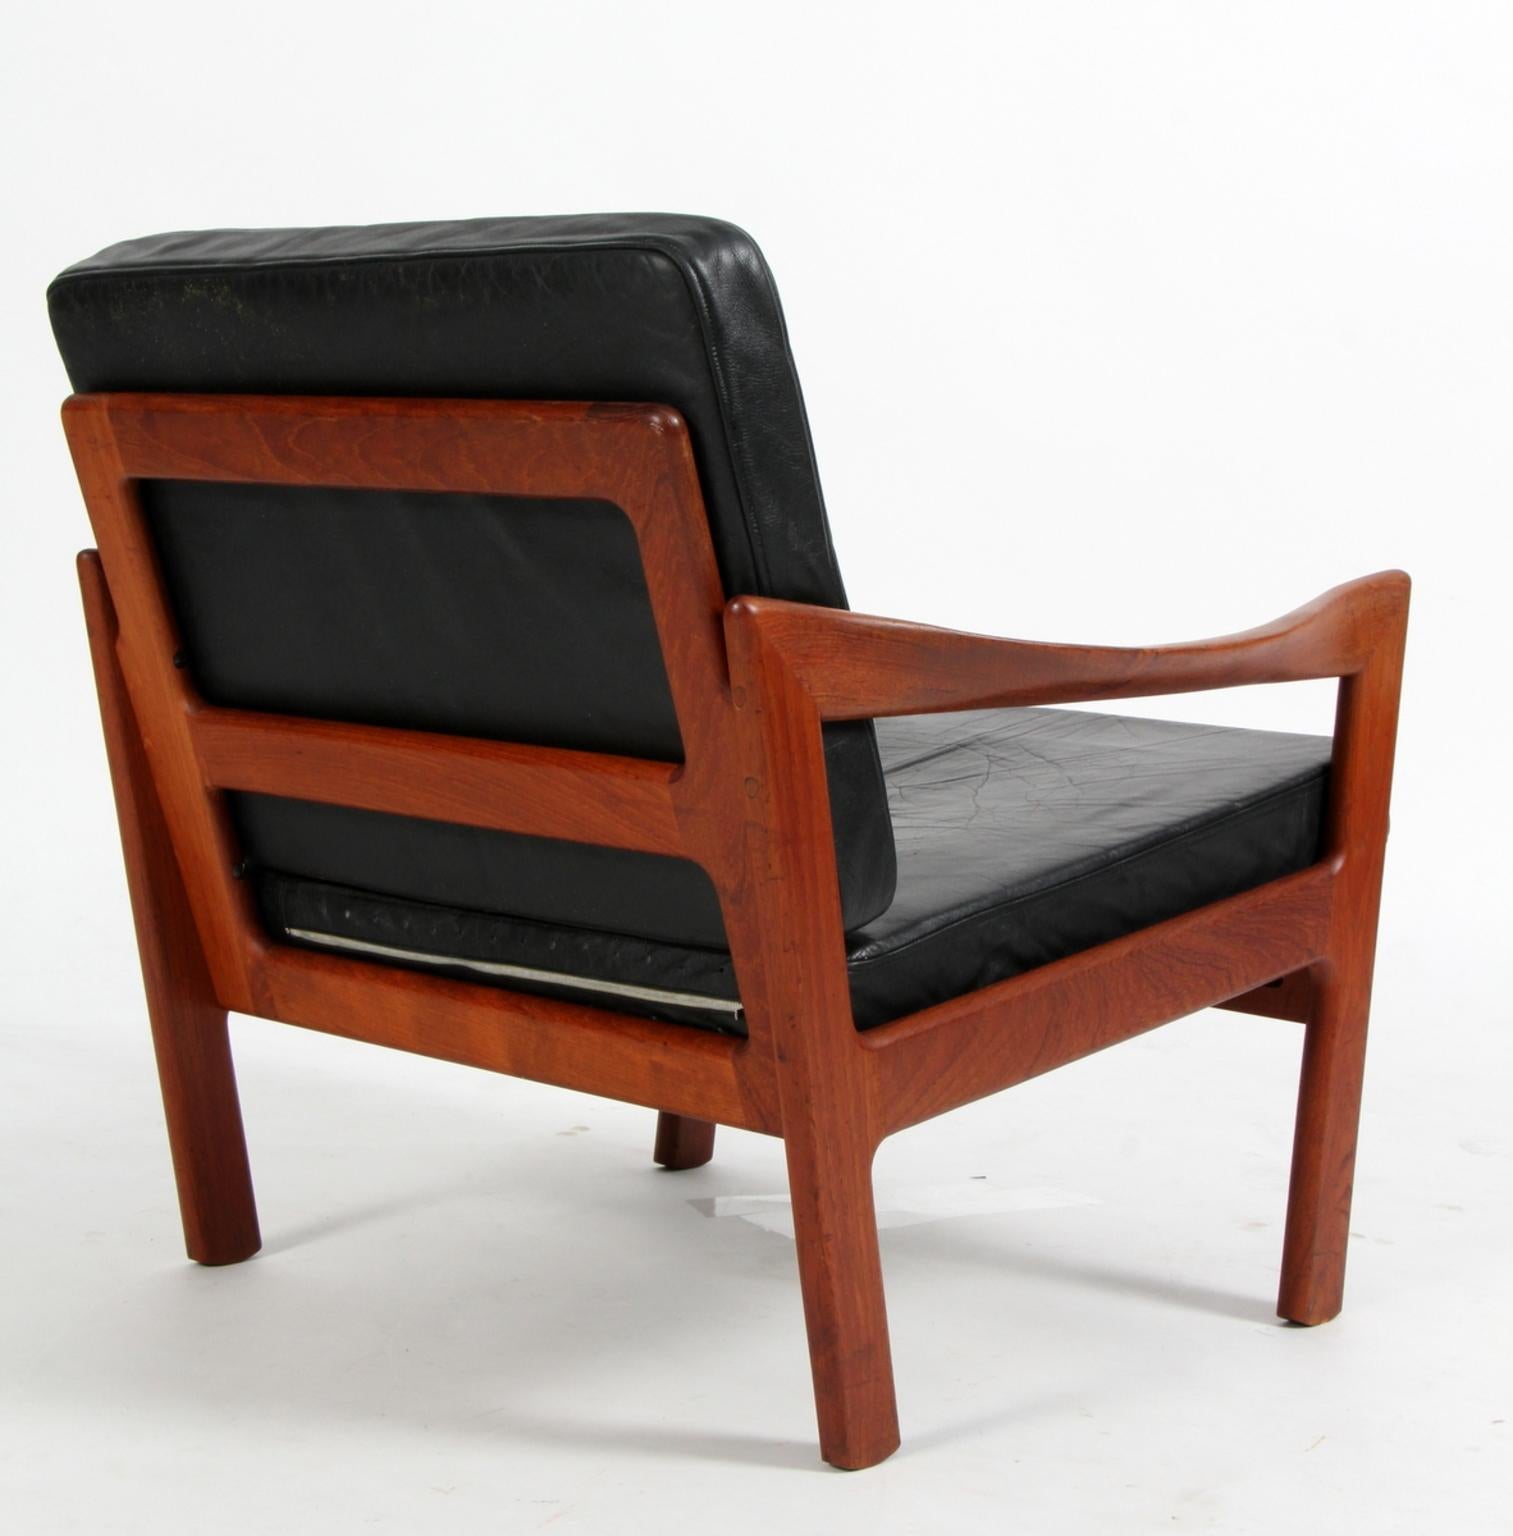 Leather Pair of Illum Wikkelsø for N. Eilersen Lounge Chairs, Model 20, in Solid Teak